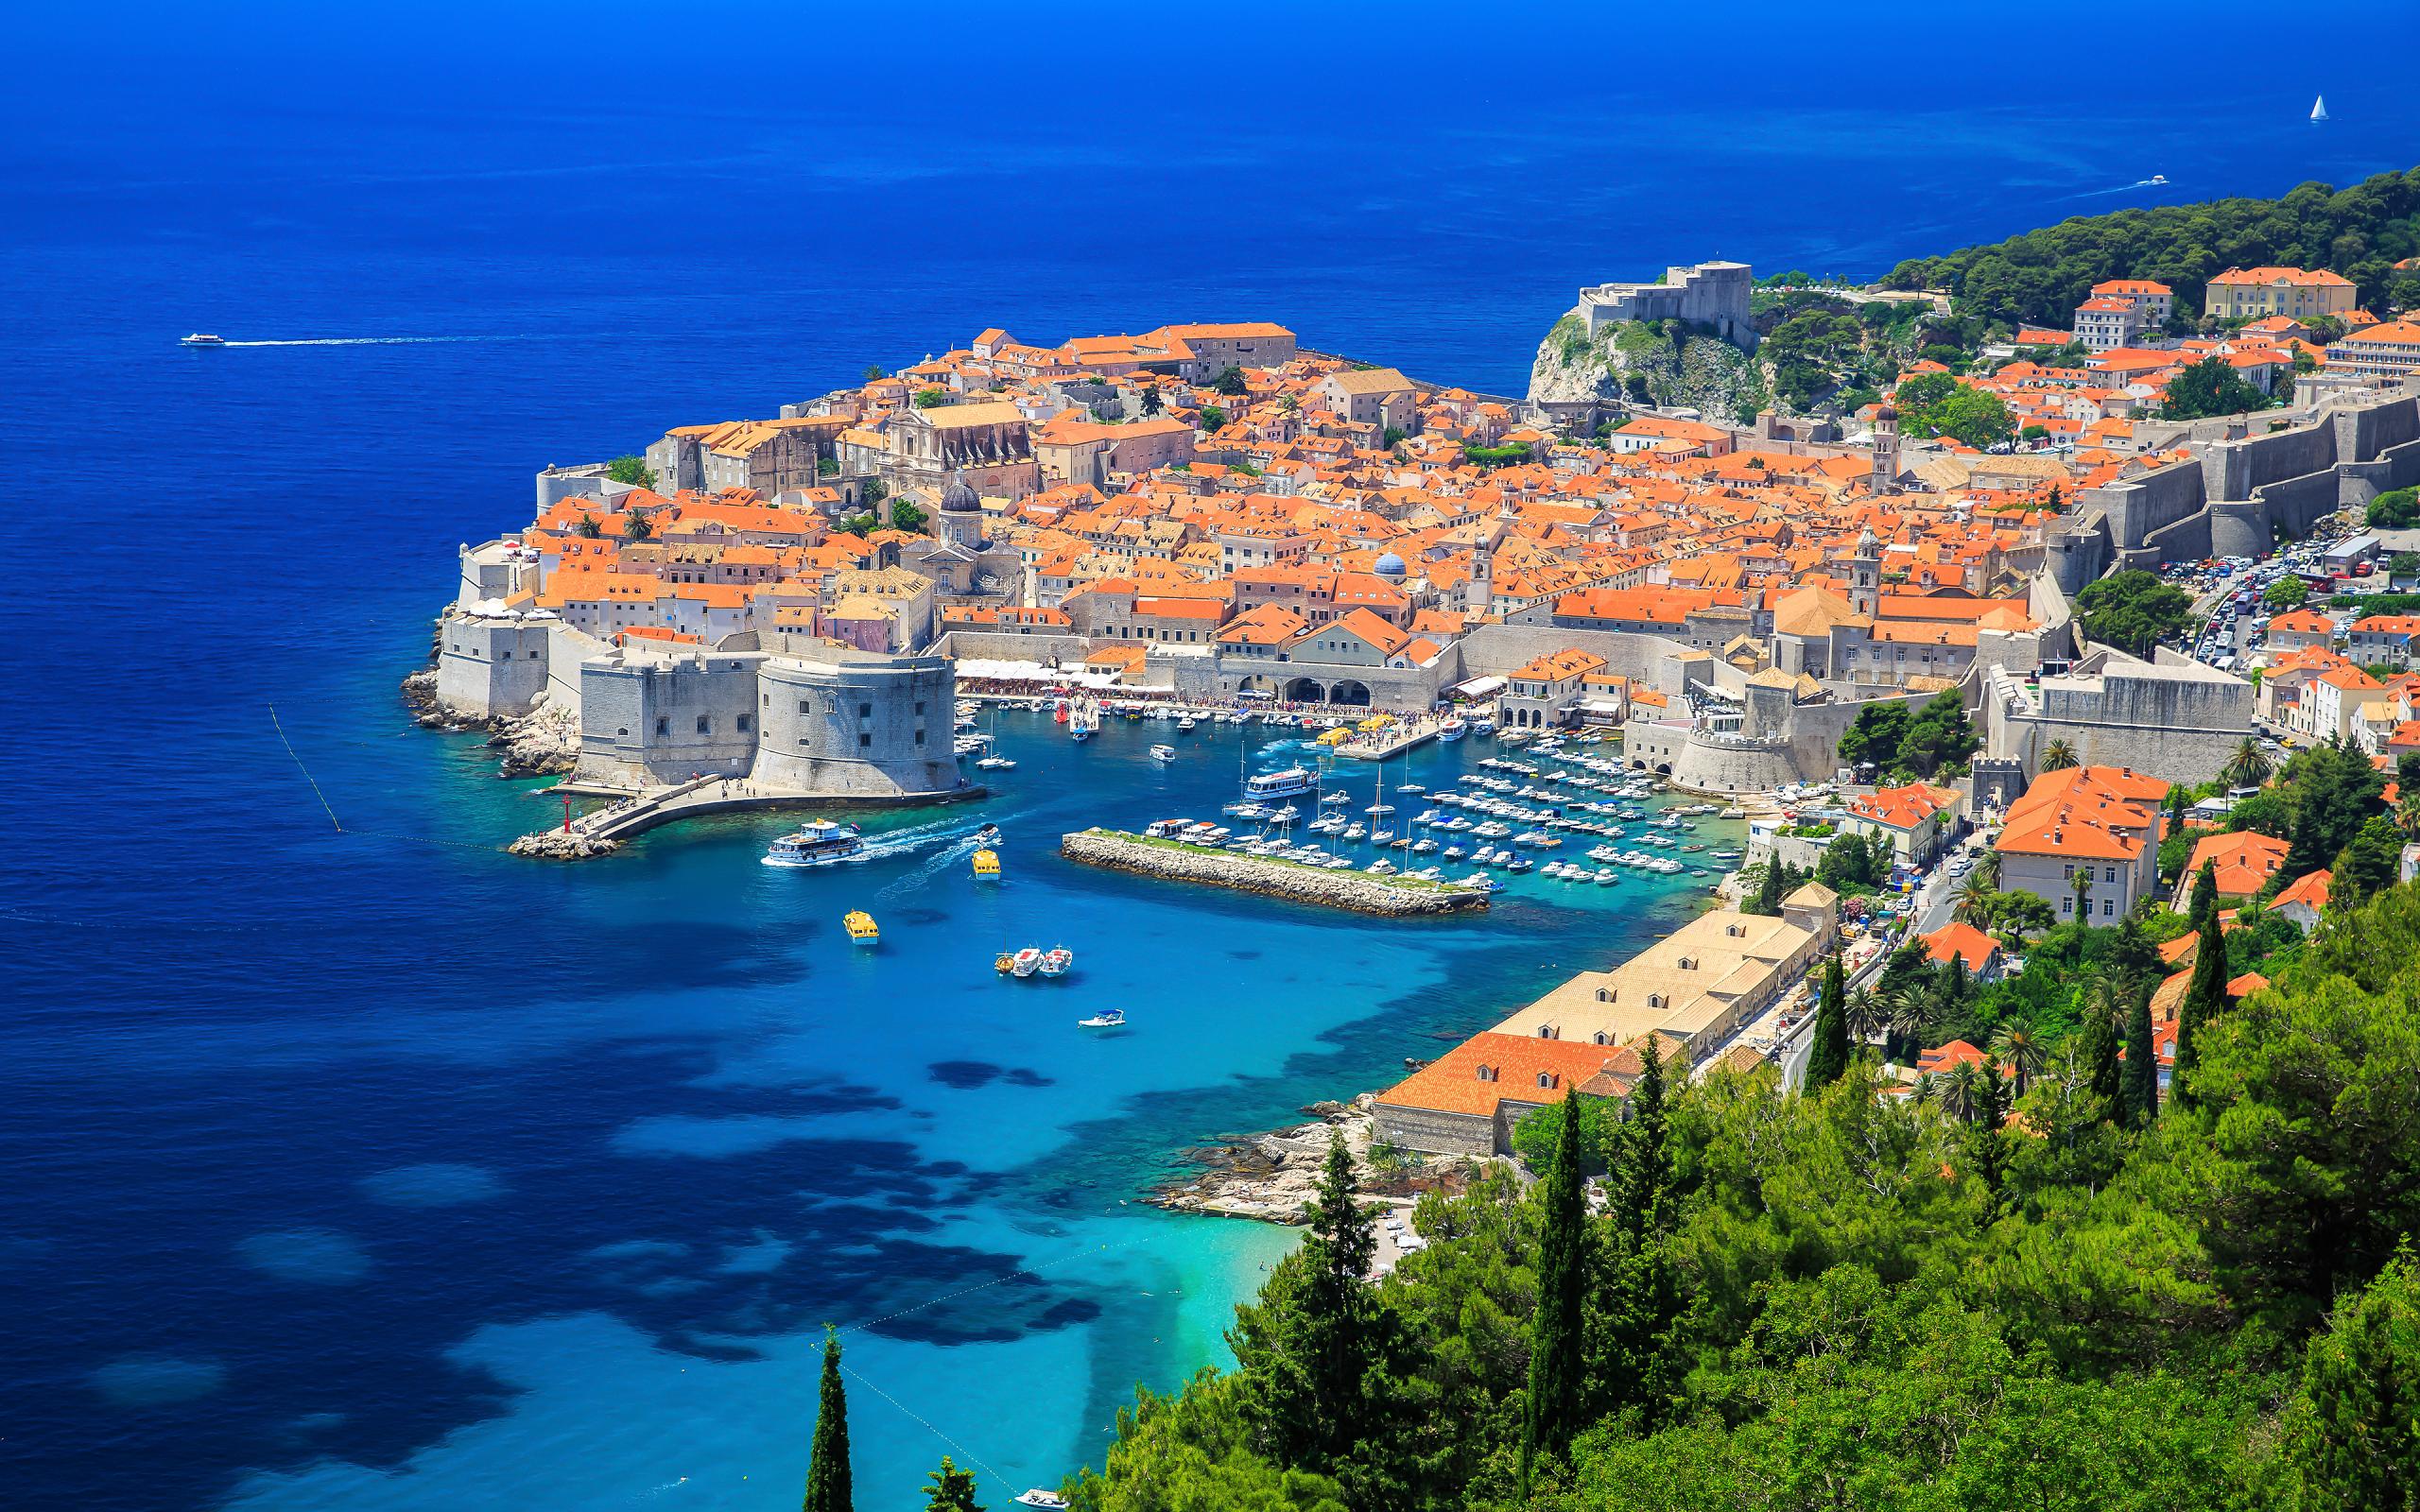 General 2560x1600 Dubrovnik cityscape Croatia town ports rooftops aerial view old building water trees boat